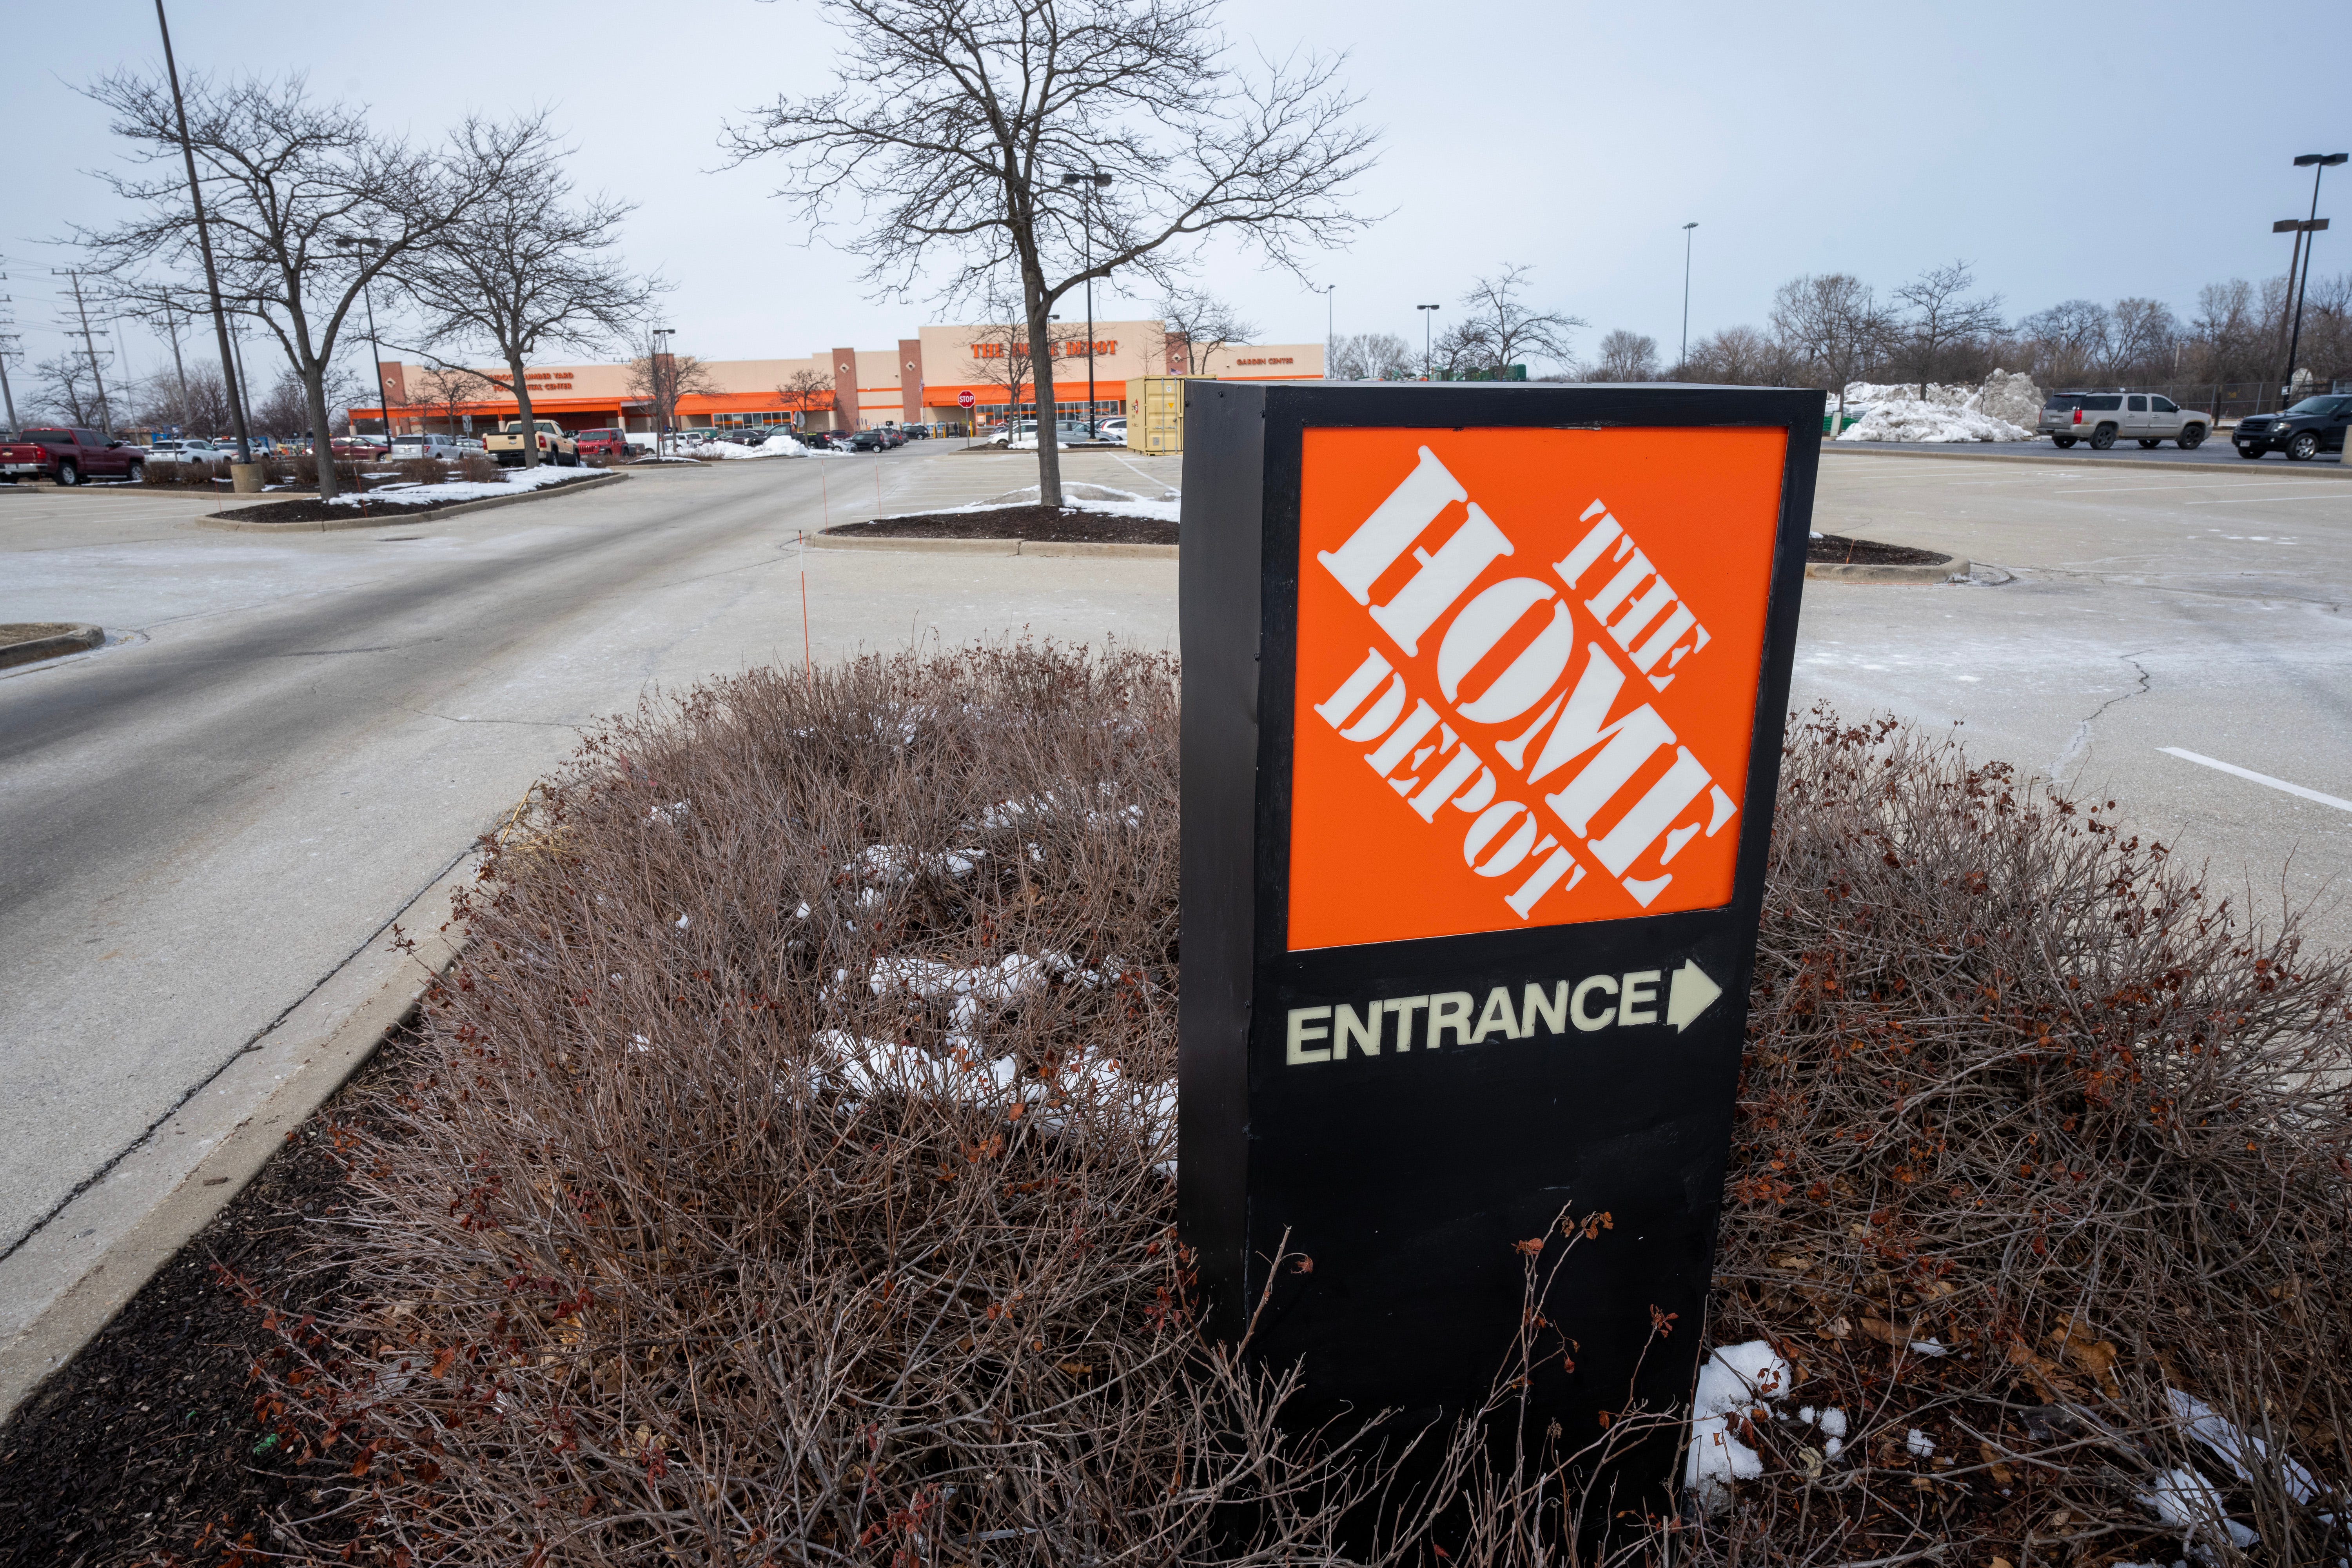 The south parking lot of Home Depot is shown at 4100 N. 124th St. in Wauwatosa, Wis. Bobbie Lou Schoeffling, 31, was found shot to death inside her home two weeks after telling a Milwaukee Police officer on July 15 that her ex-boyfriend beat her in a car in front of her children about 30 minutes earlier.